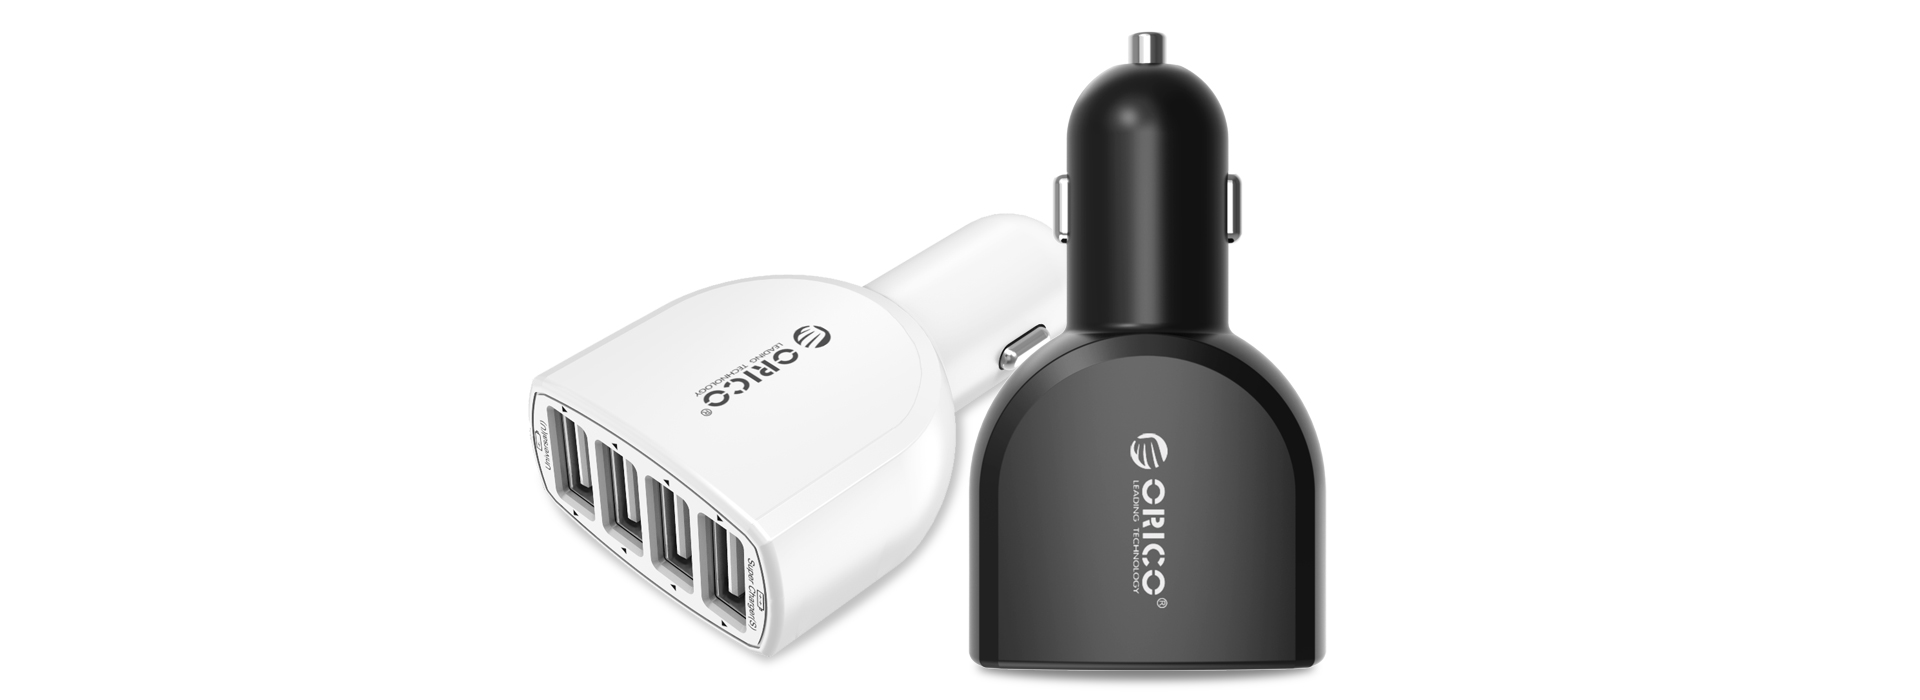 ORICO 4 Port USB Car Charger with Smart Super Charger